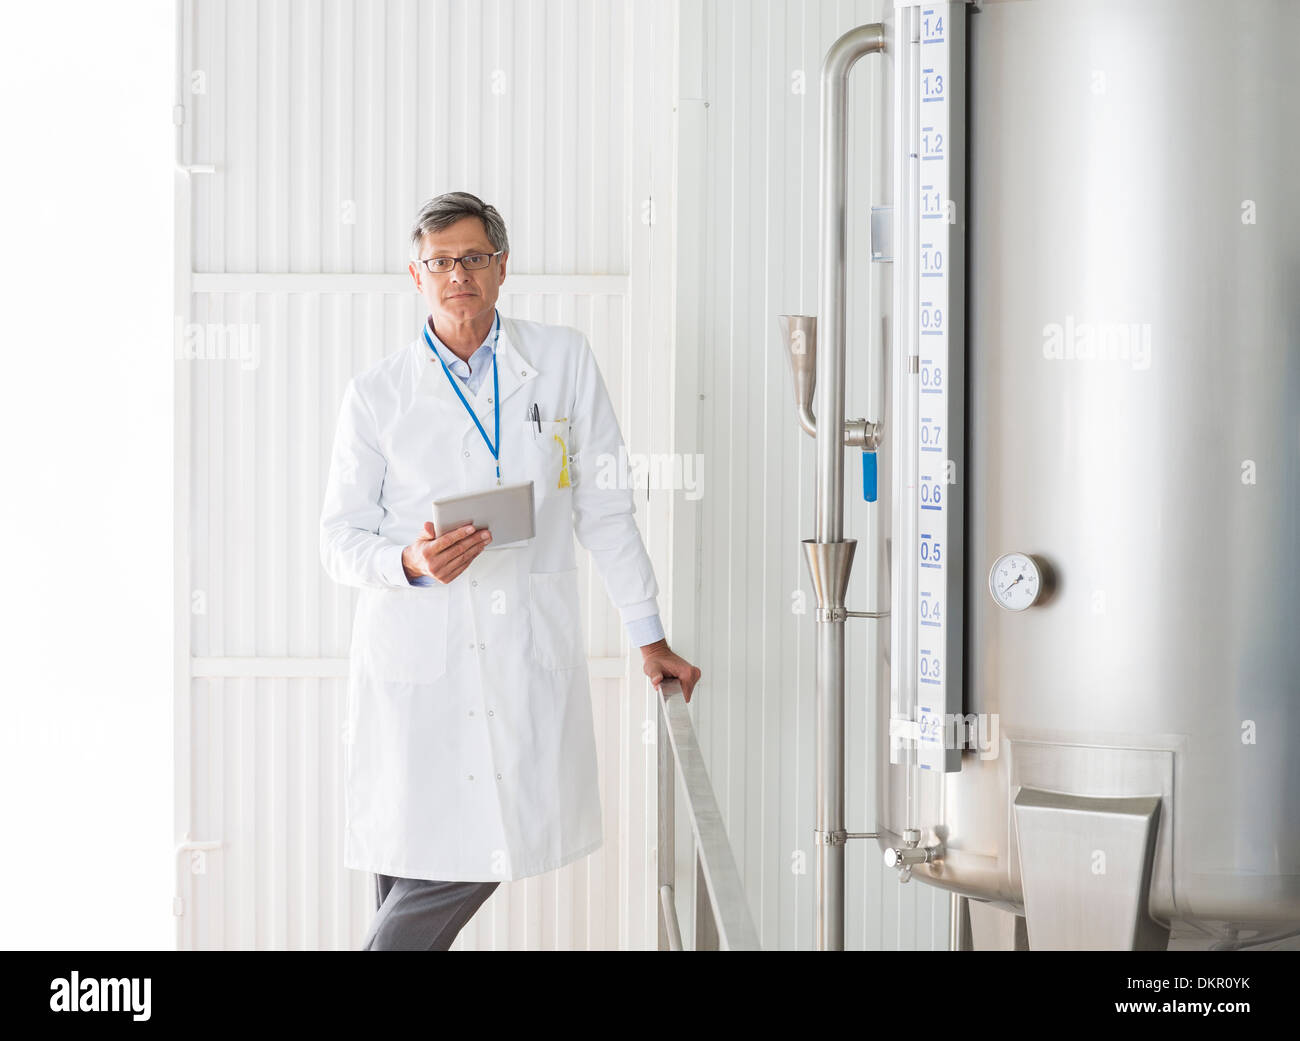 Scientist smiling in food processing plant Stock Photo